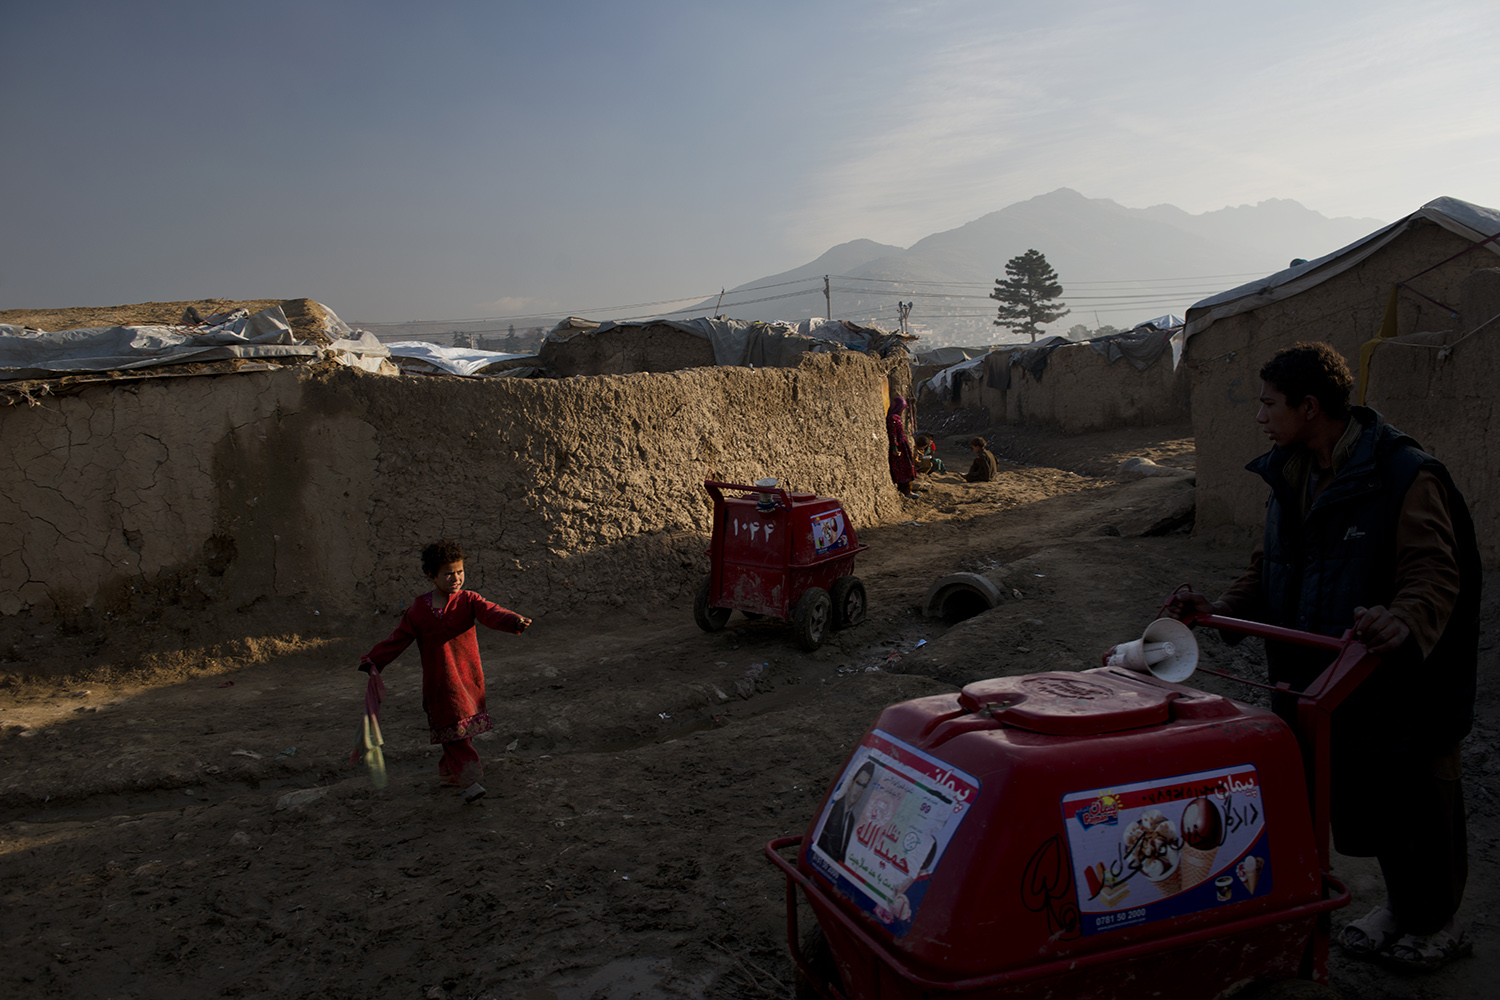 Displaced Afghans from provinces in Southern Afghanistan live in camps in Charai-e-gamber on the outskirts of Kabul, Afghanistan, March 25, 2014.